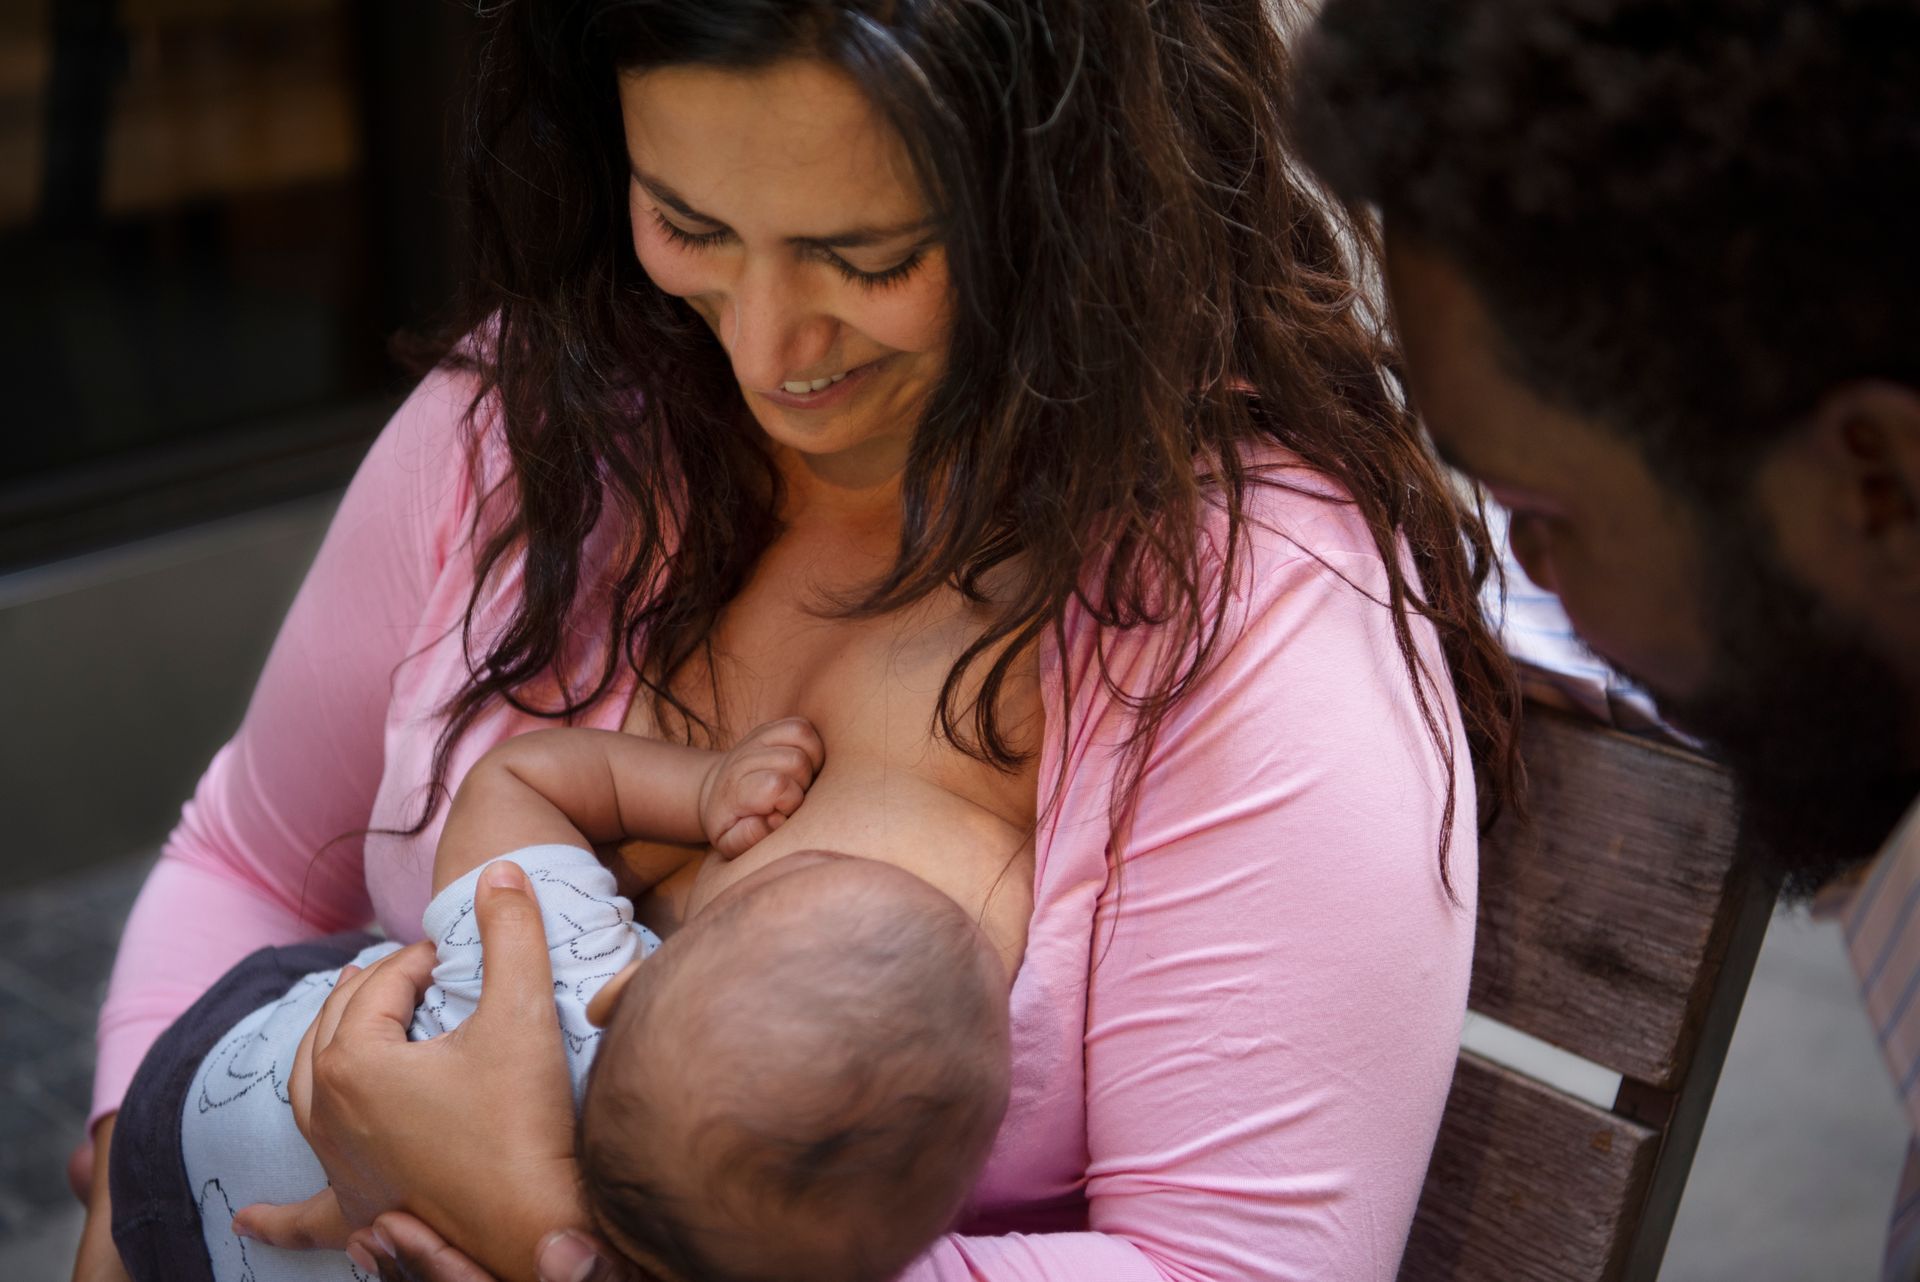 A woman with dark hair, wearing a pink, unbuttoned blouse, is sat on a wooden seat looking down smiling at her breastfeeding baby.  A man with dark hair and a beard looks on from one side smiling.  The baby is dressed in a shirt and trousers and is viewed from behind as he feeds.
Designed by freepik